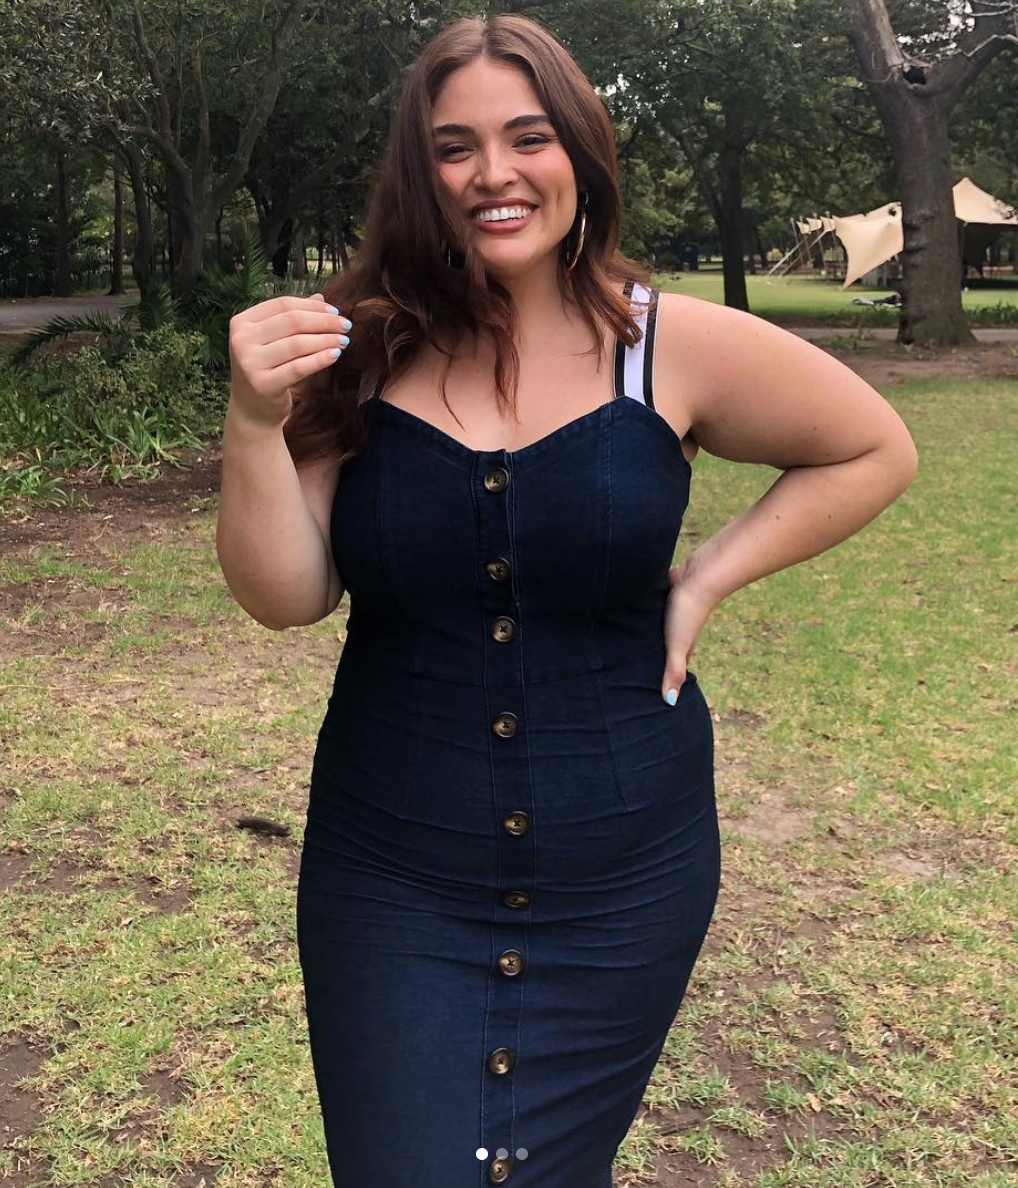 200 Curvy / Plus Size Fashion Instagrammers to follow for style